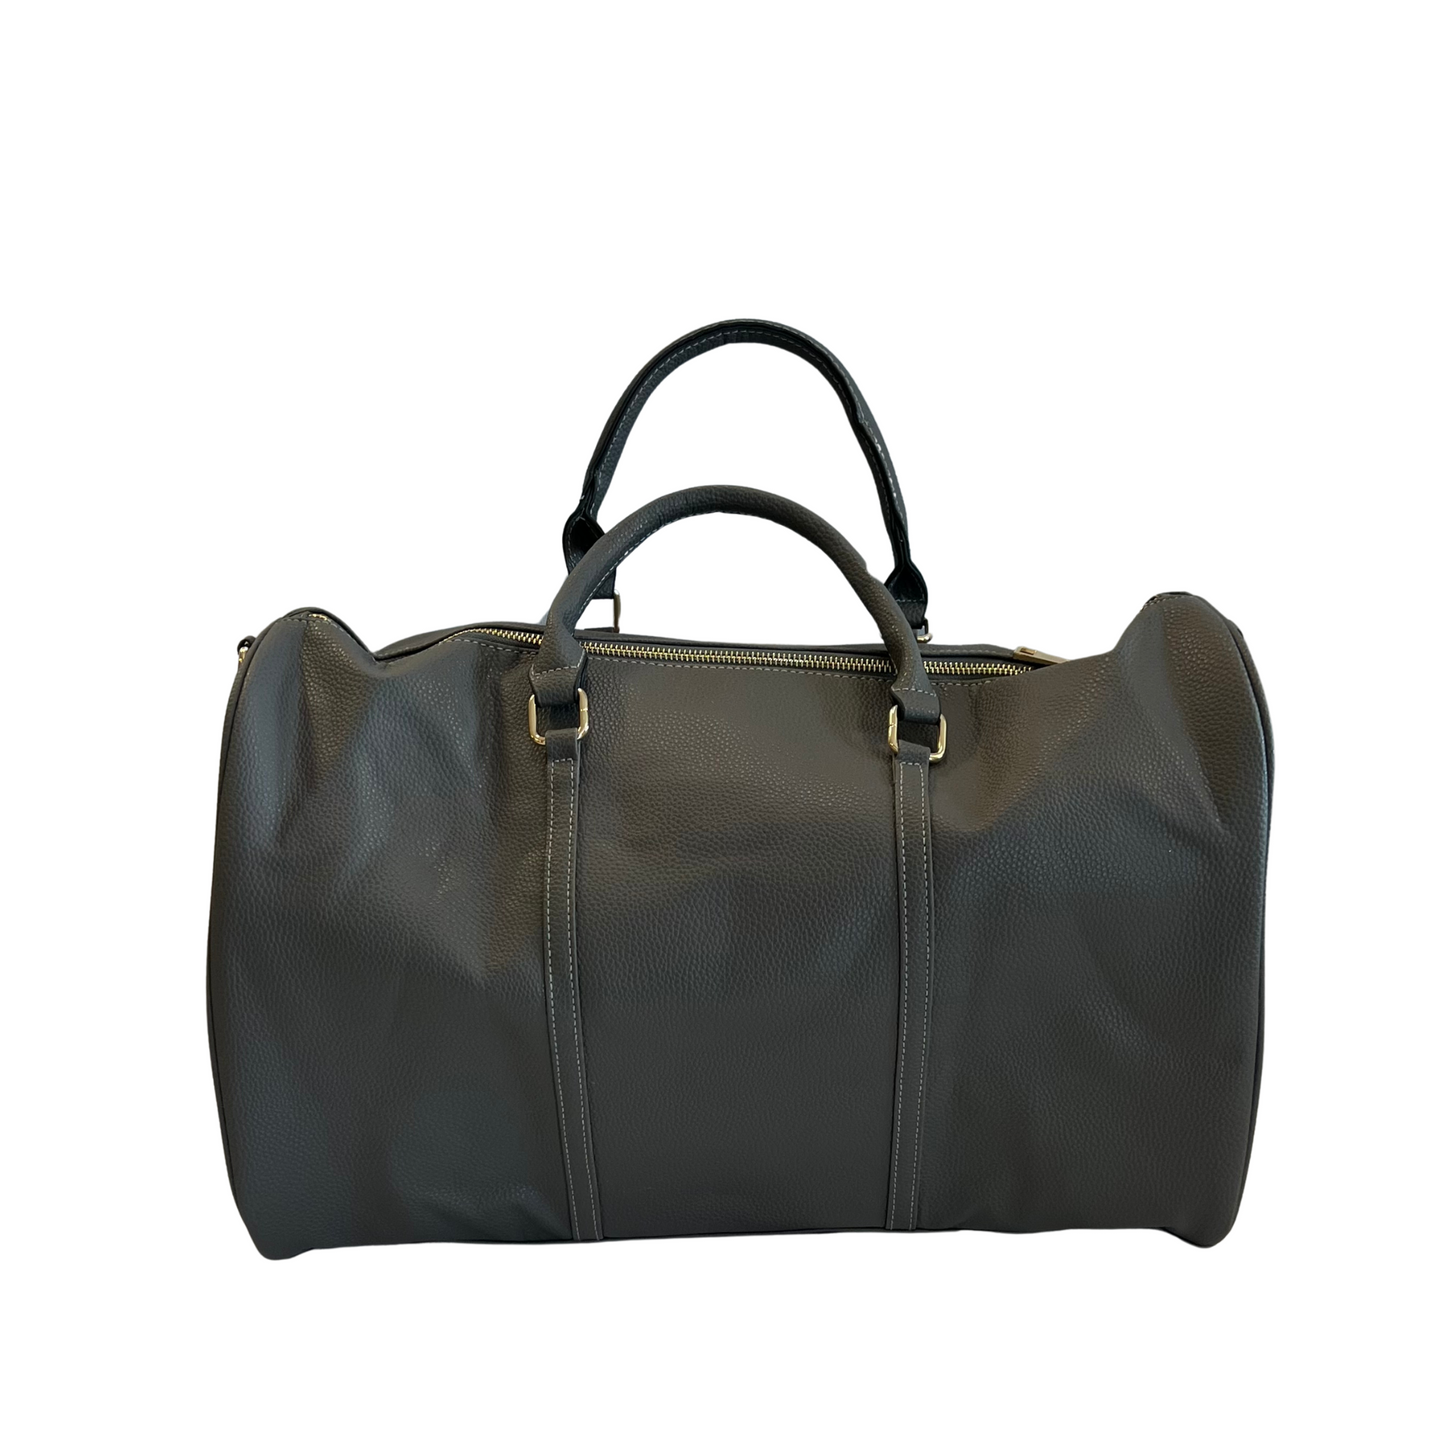 Stay stylish on the go with this elegant leather duffel bag. Choose from two classic colors--black or grey--for a look that's sure to last. Crafted from top-quality leather, this bag is perfect for weekend travel.